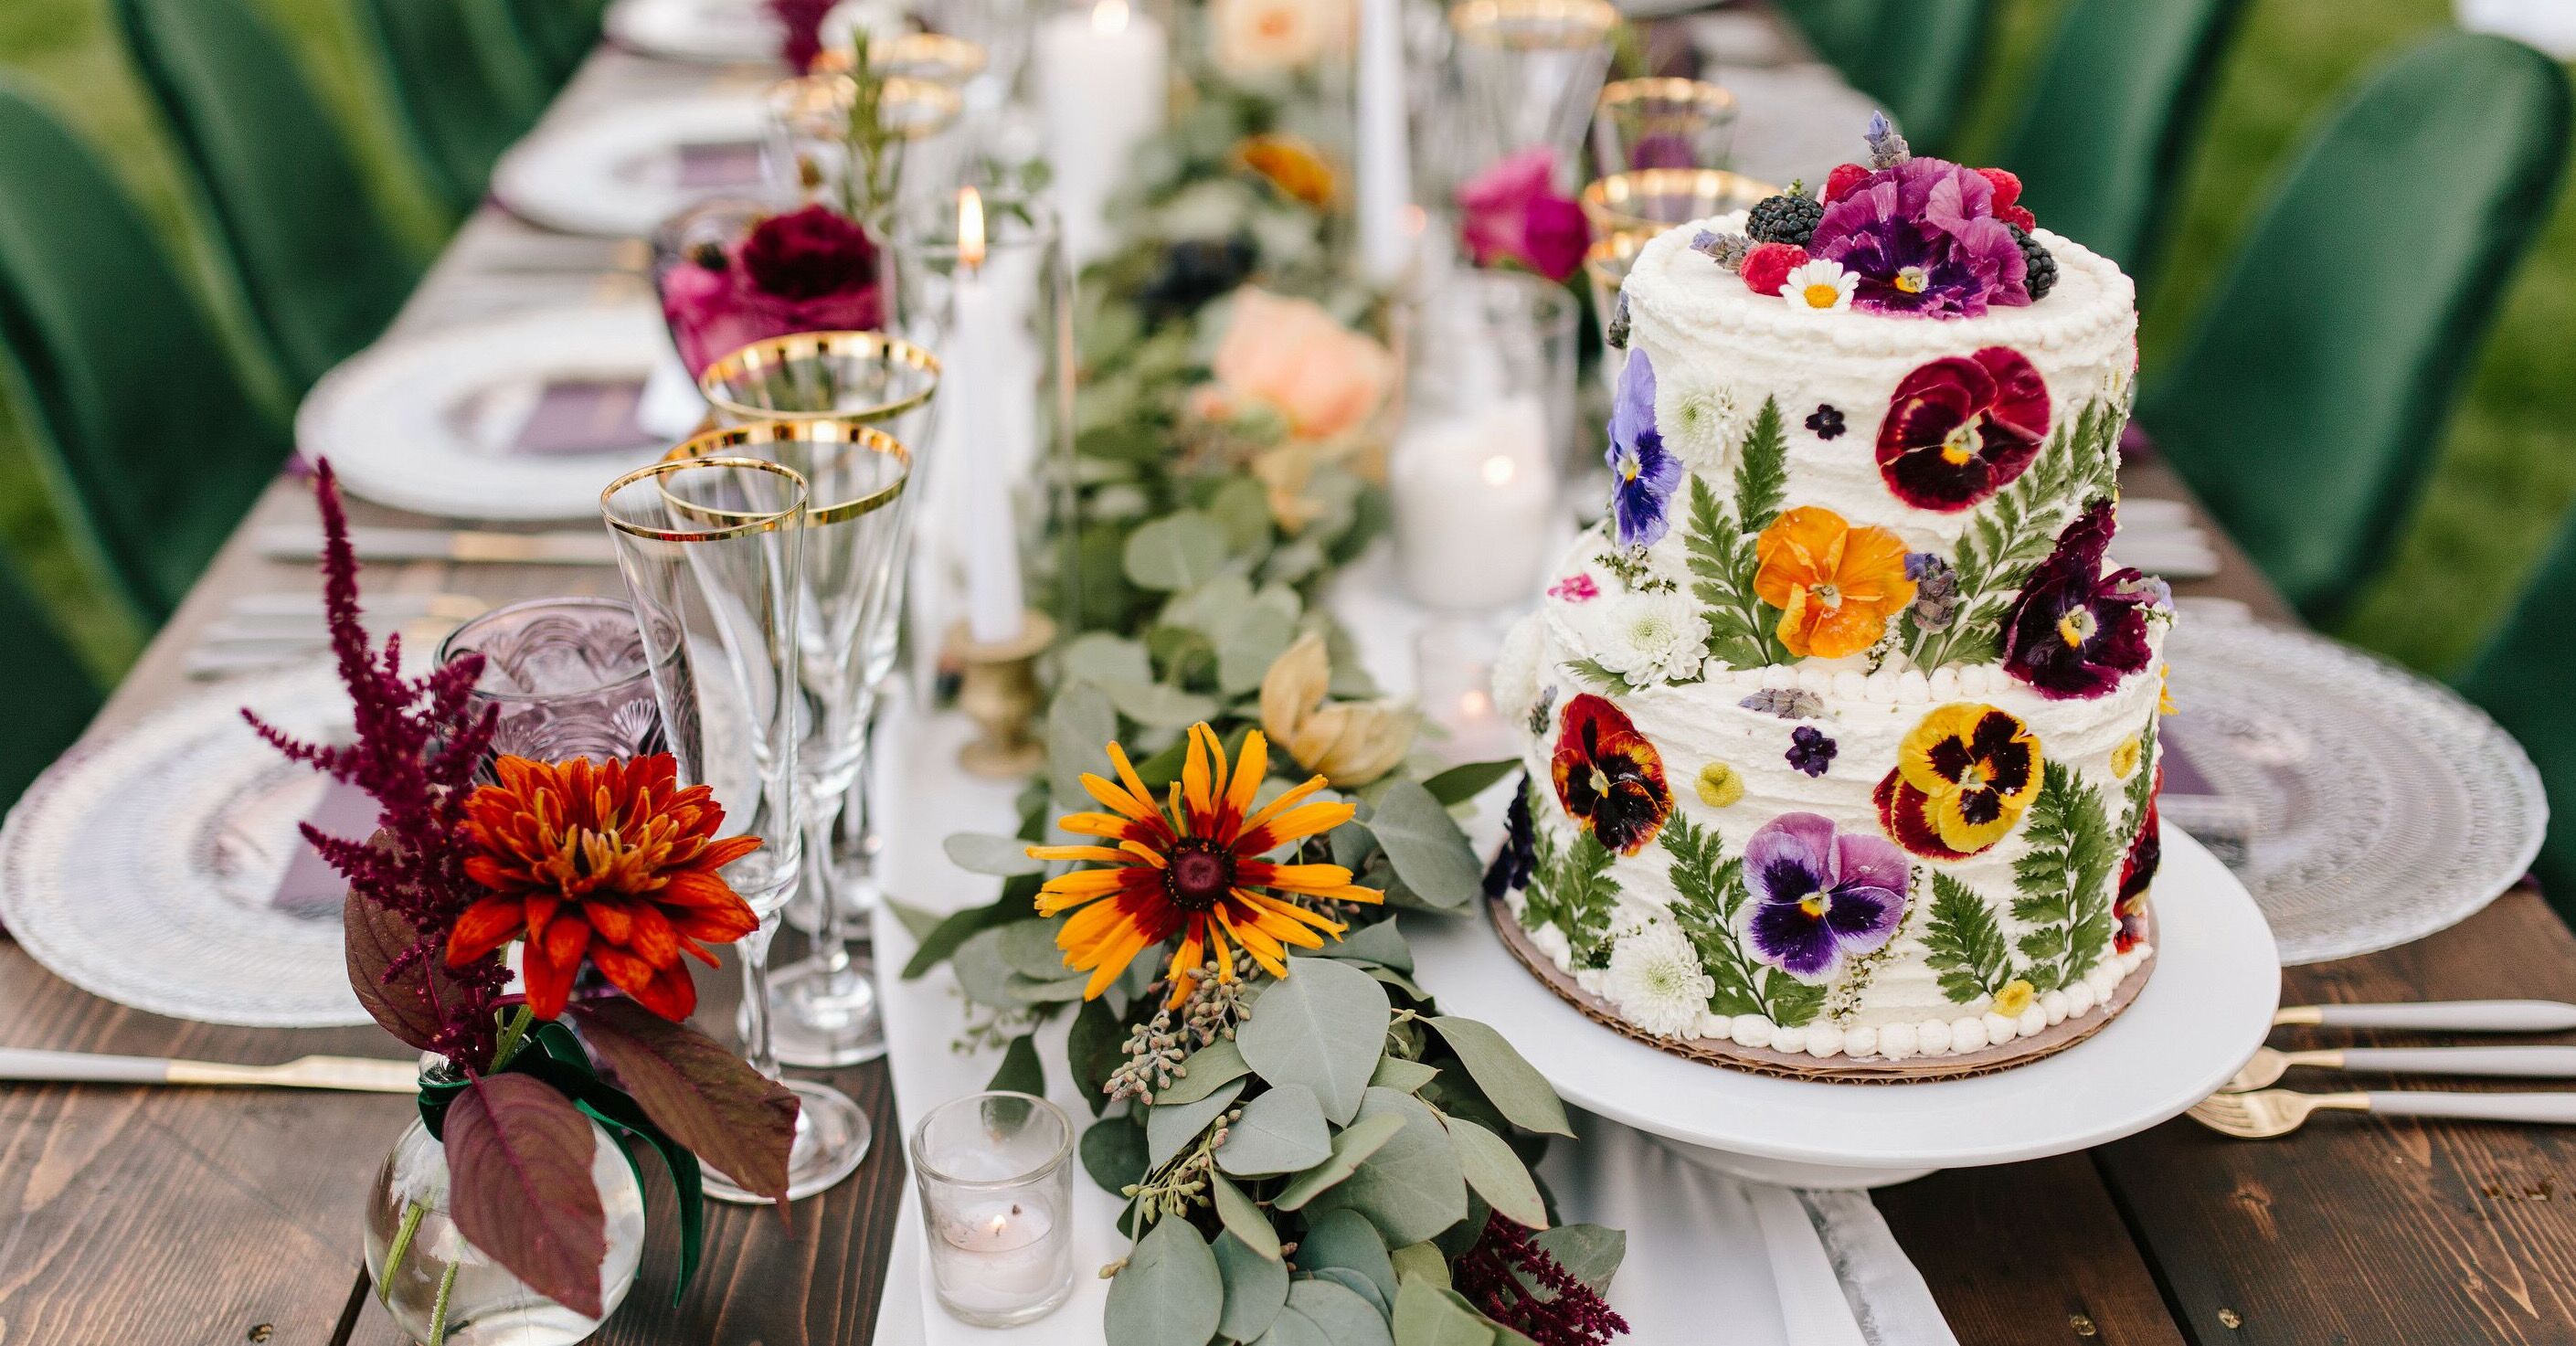 47 Flower Wedding Cakes for Any Style & Season